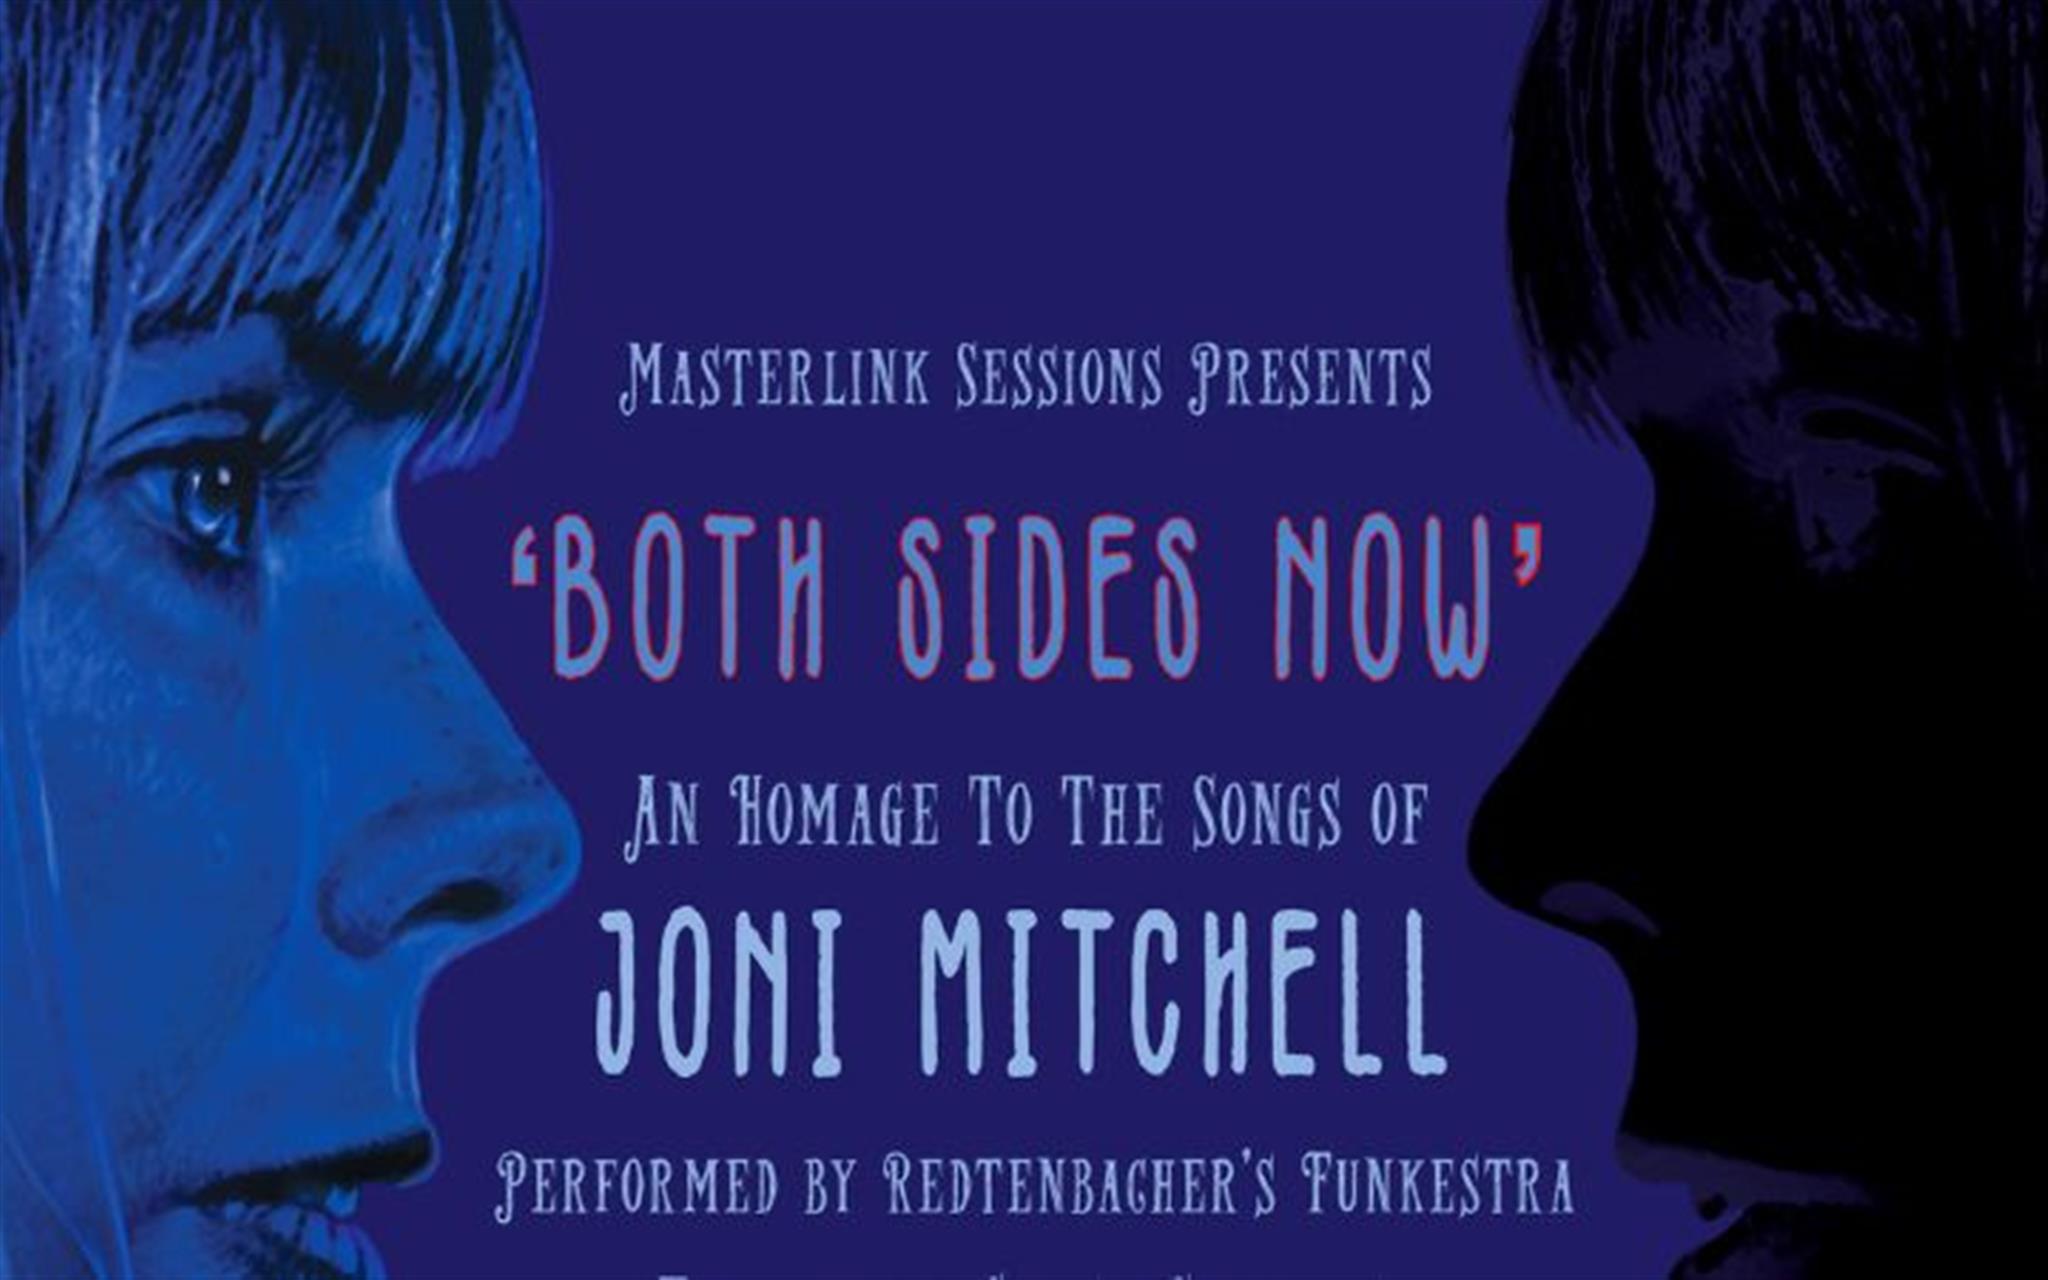 Both Sides Now Homage To The Songs Of Joni Mitchell